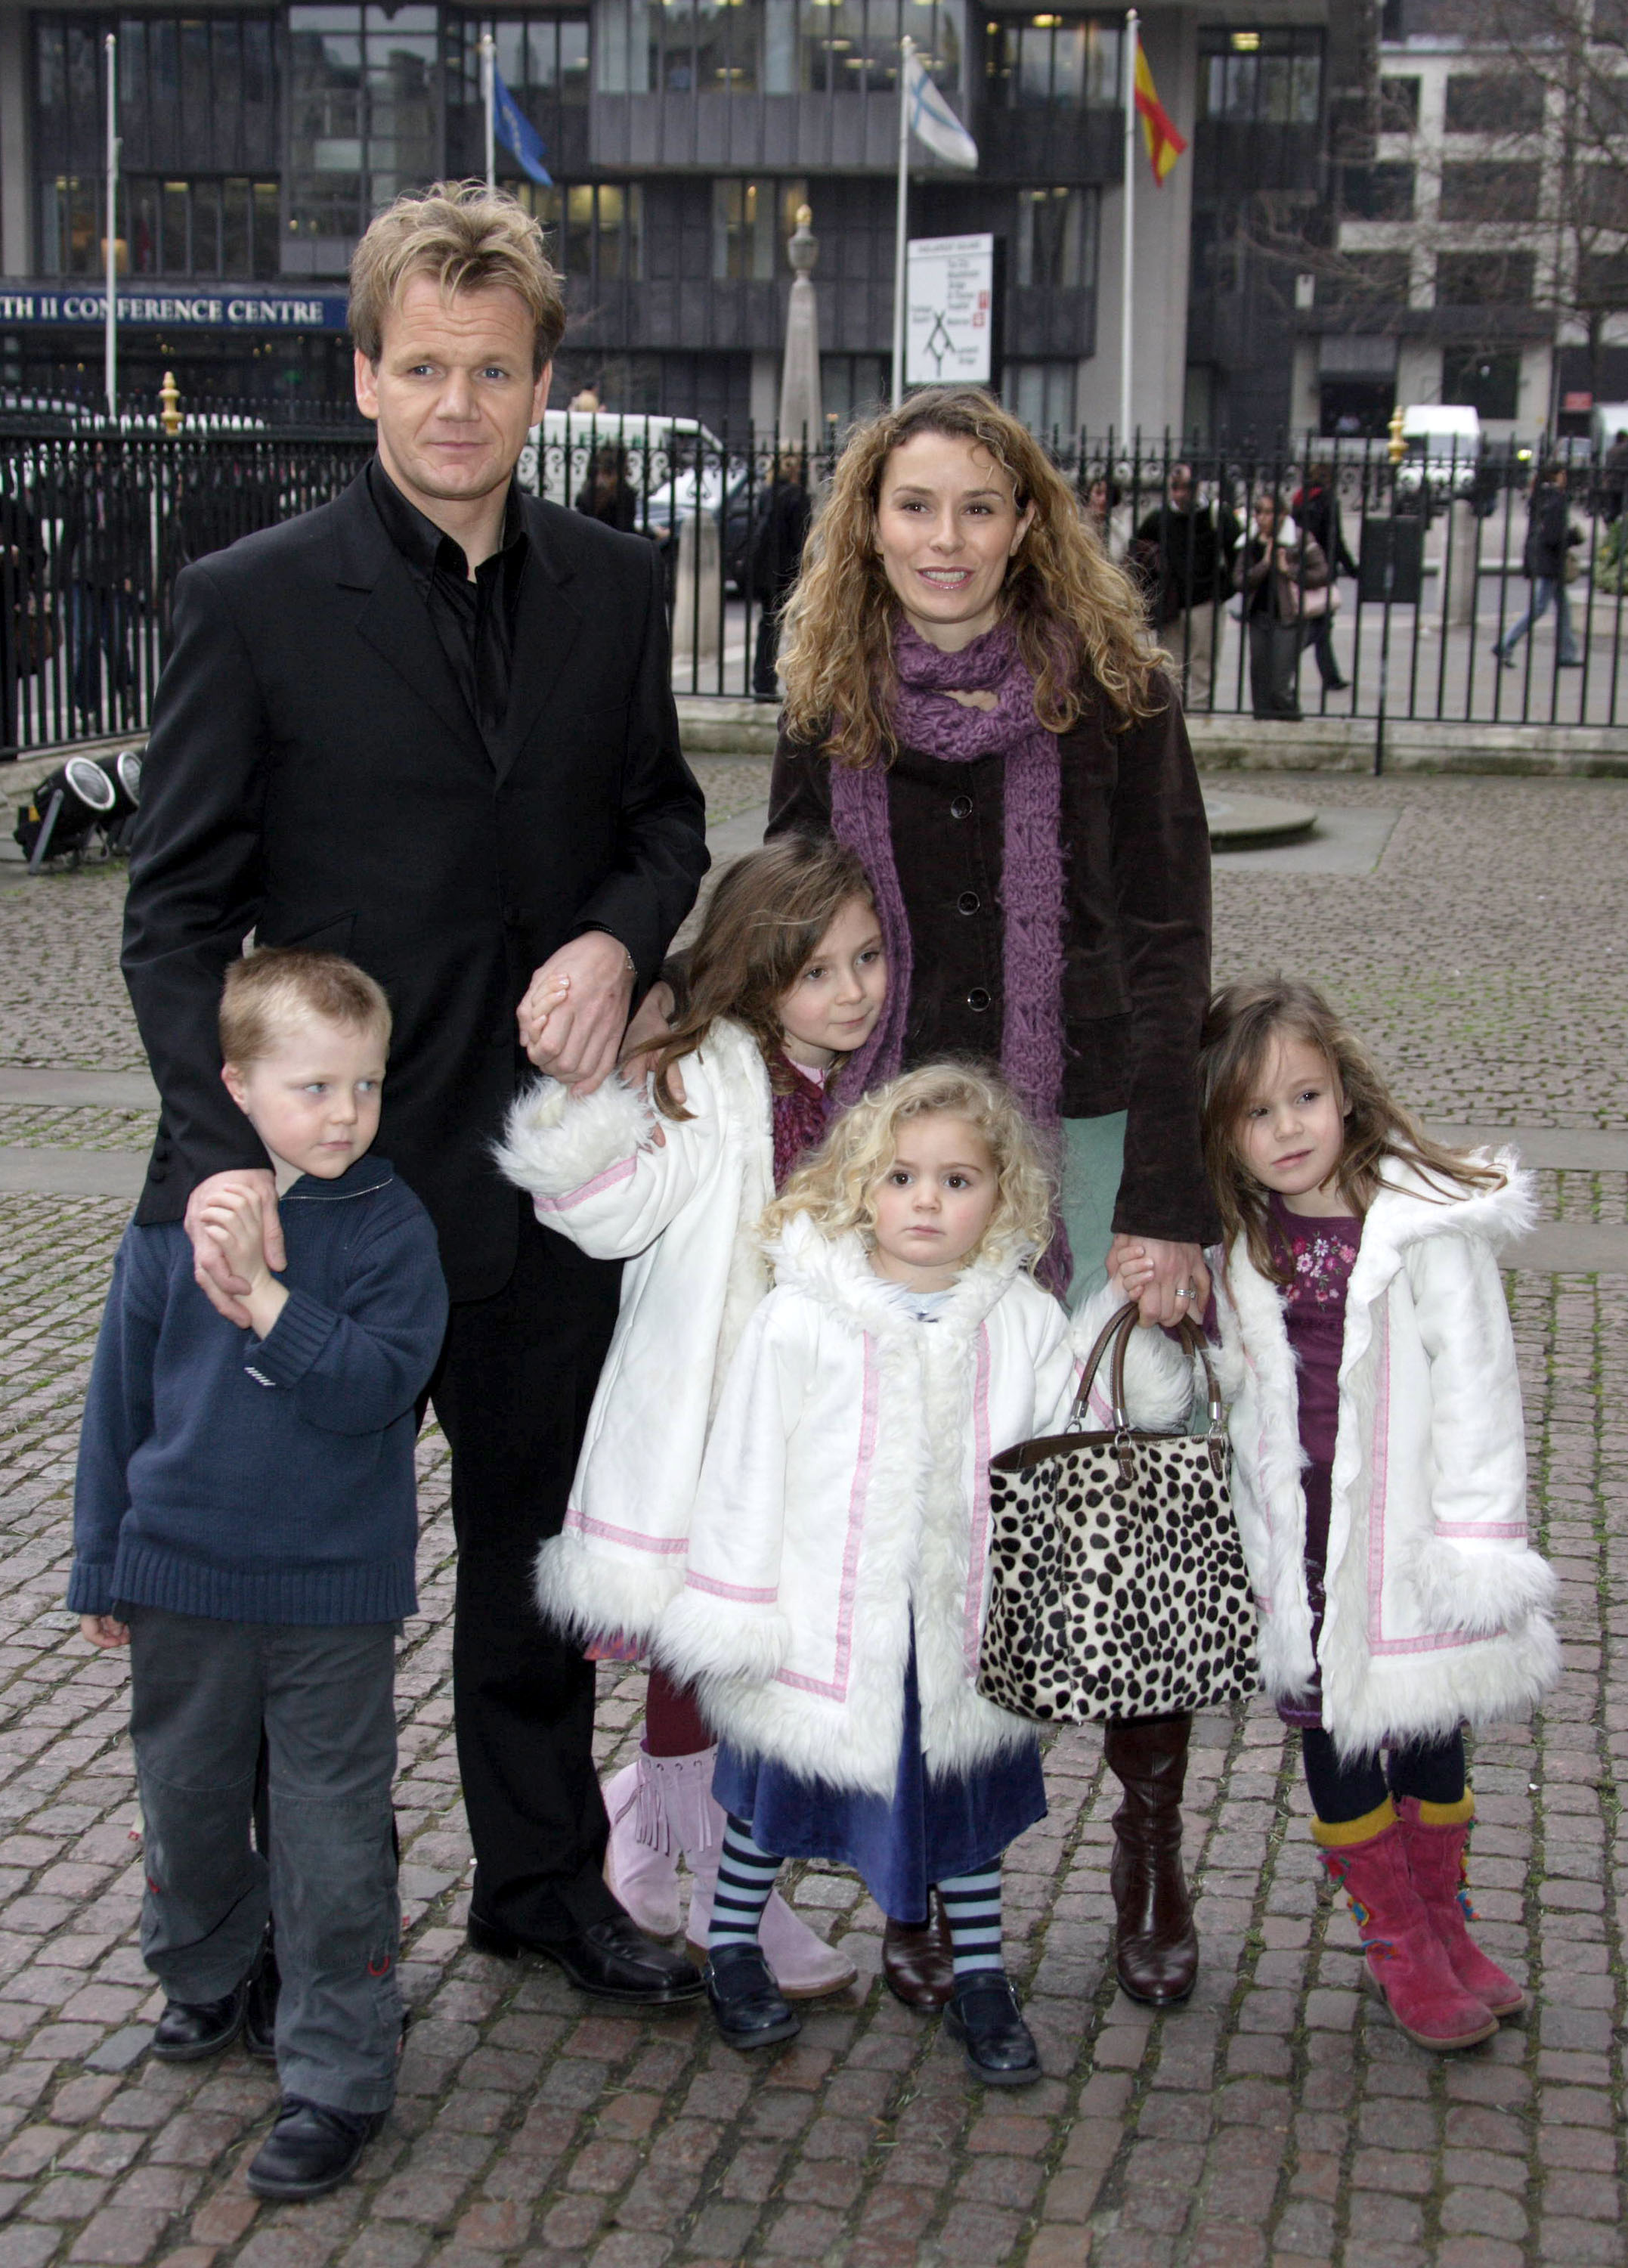 Jack Ramsay, Gordon Ramsay, Megan Ramsay, Tana Ramsay, Matilda Ramsay et Holly Ramsay au Woman's Own Children of Courage 2004 le 15 décembre 2005 | Source : Getty Images